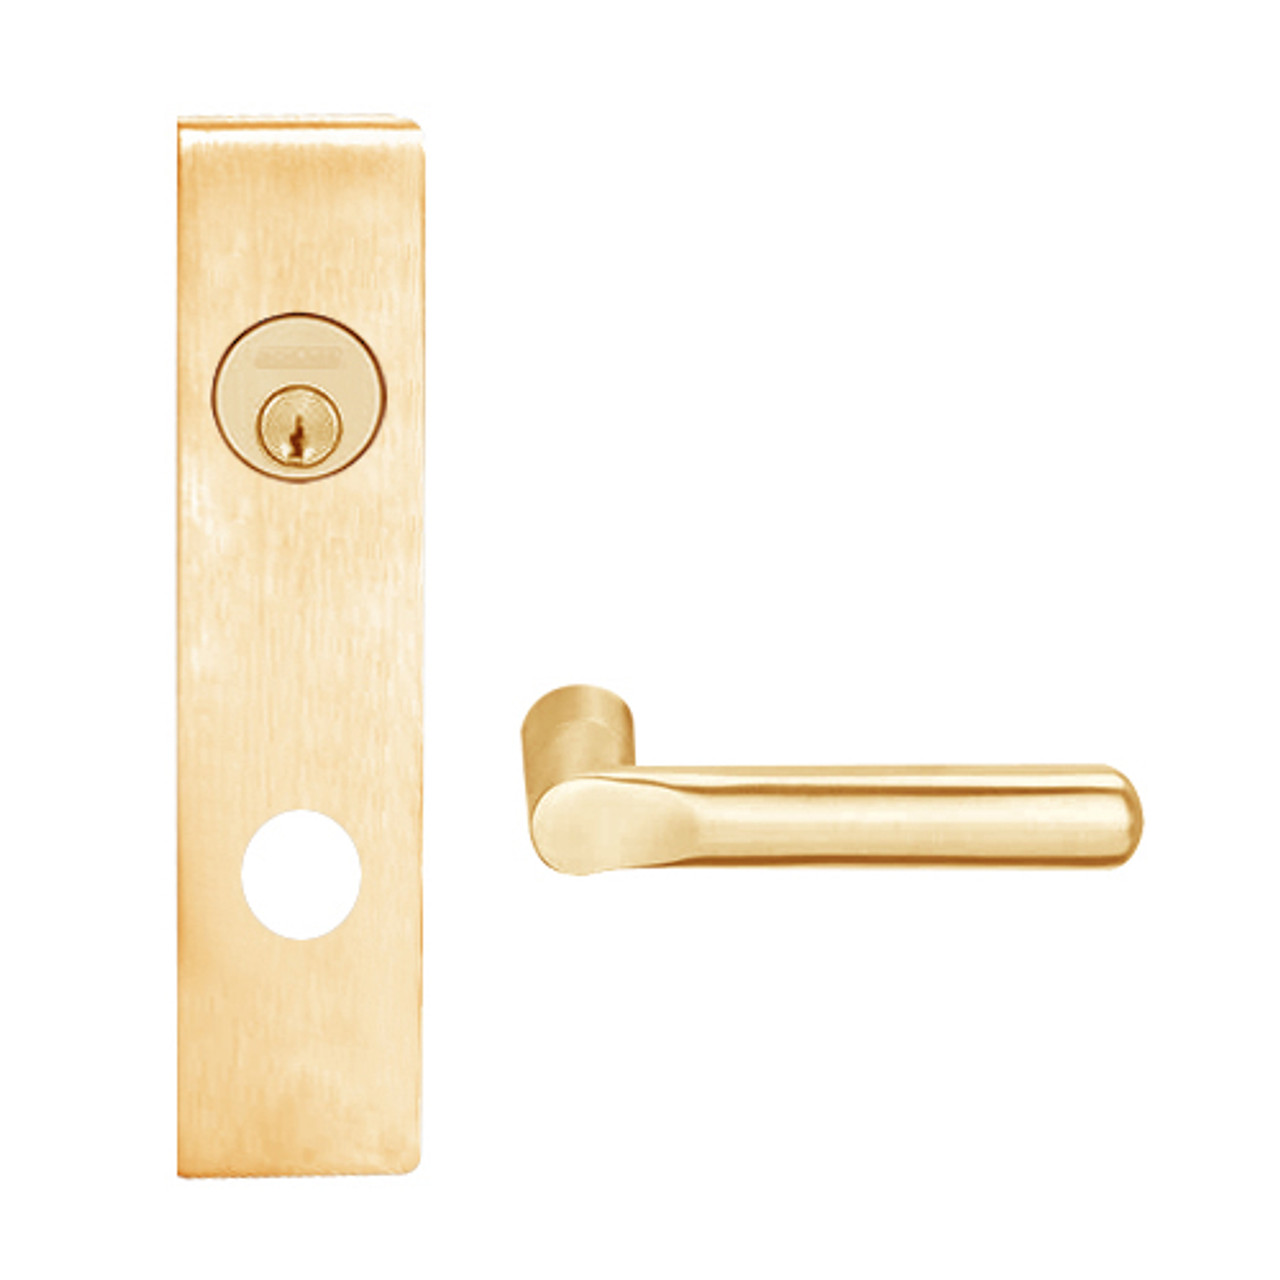 L9026L-18L-612 Schlage L Series Less Cylinder Exit Lock with Cylinder Commercial Mortise Lock with 18 Cast Lever Design in Satin Bronze